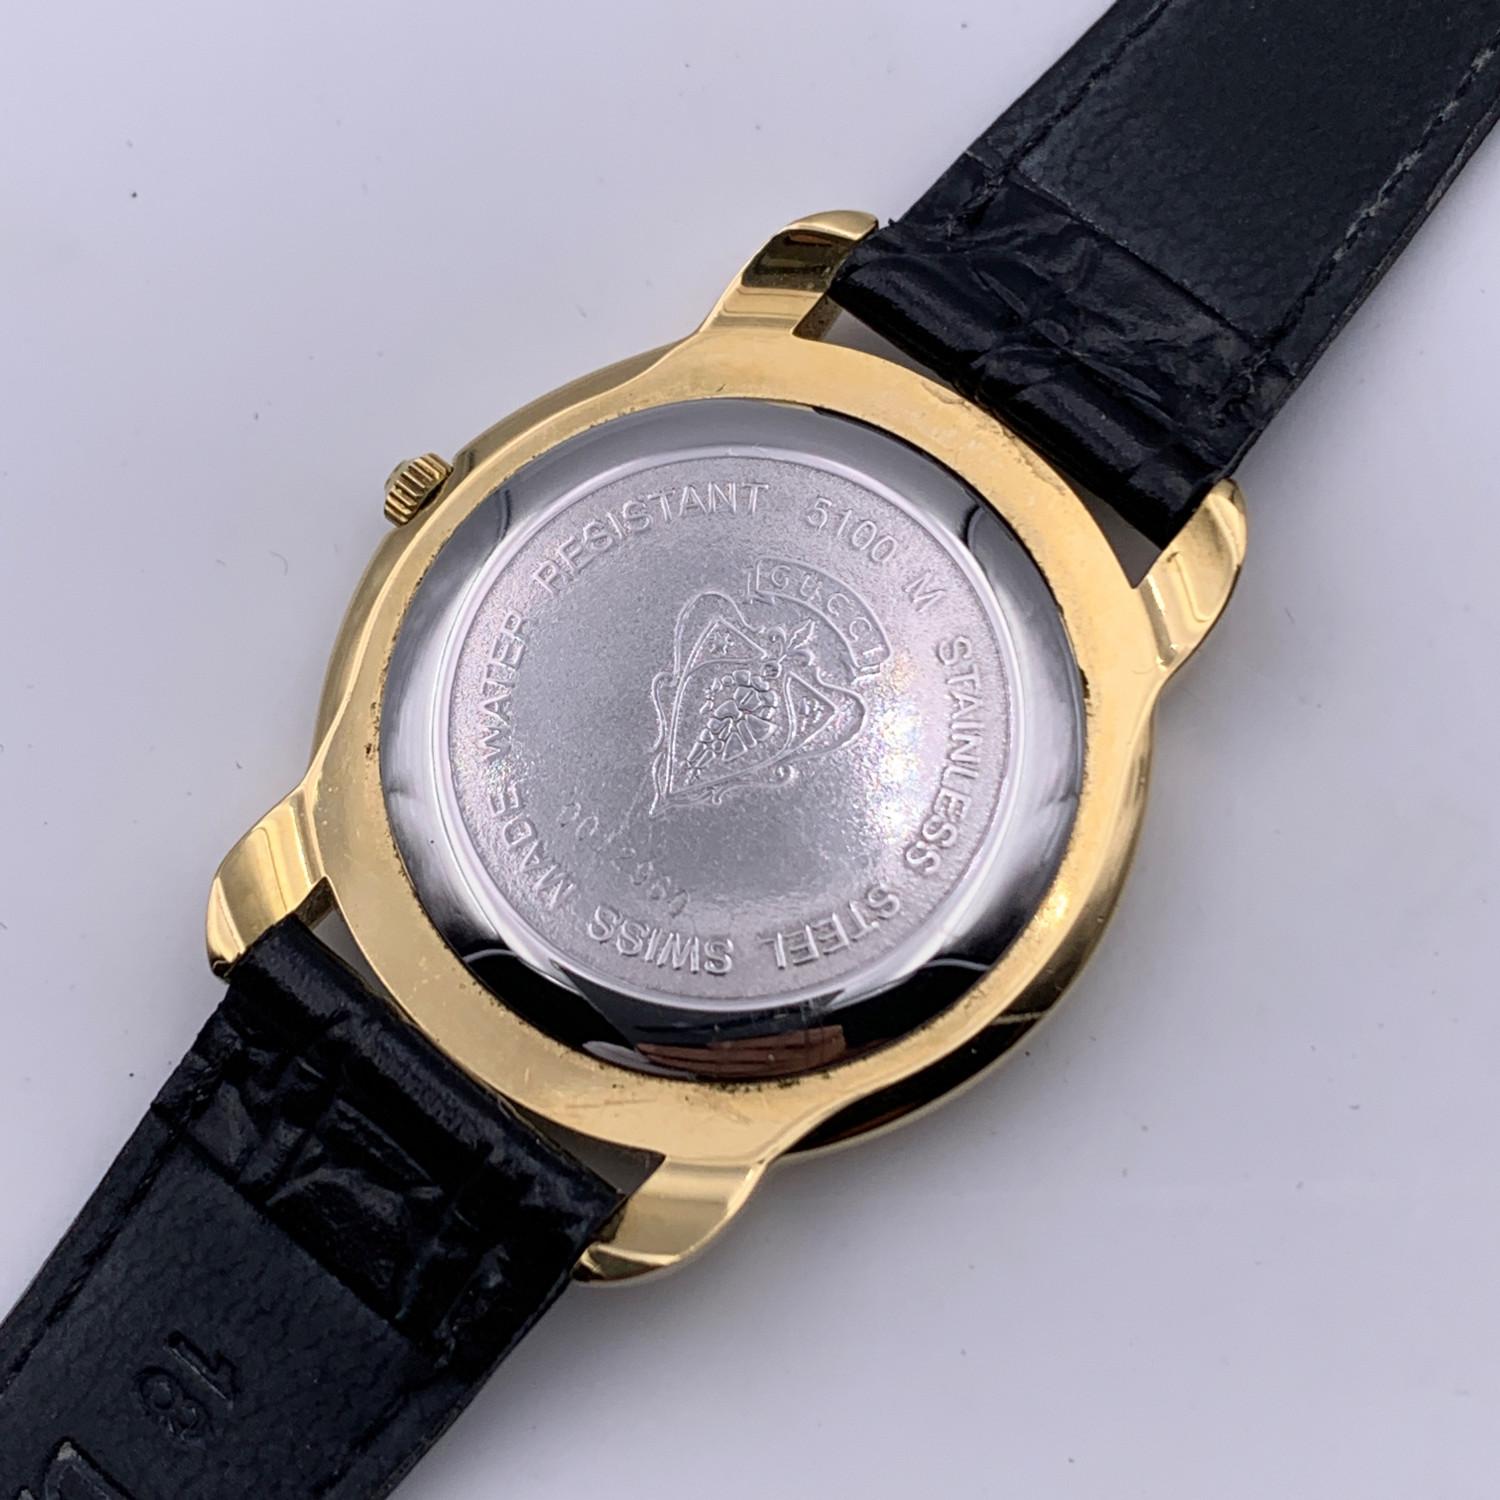 Beautiful vintage wristwatch mod. 5100 M by GUCCI. Round gold metal stainless steel case. Black dial. Swiss Made Quartz Movement. Roman numbers around the bezel. Date indicator at 6 o clock. Black leather wrist strap with 7 holes adjustment. GG -